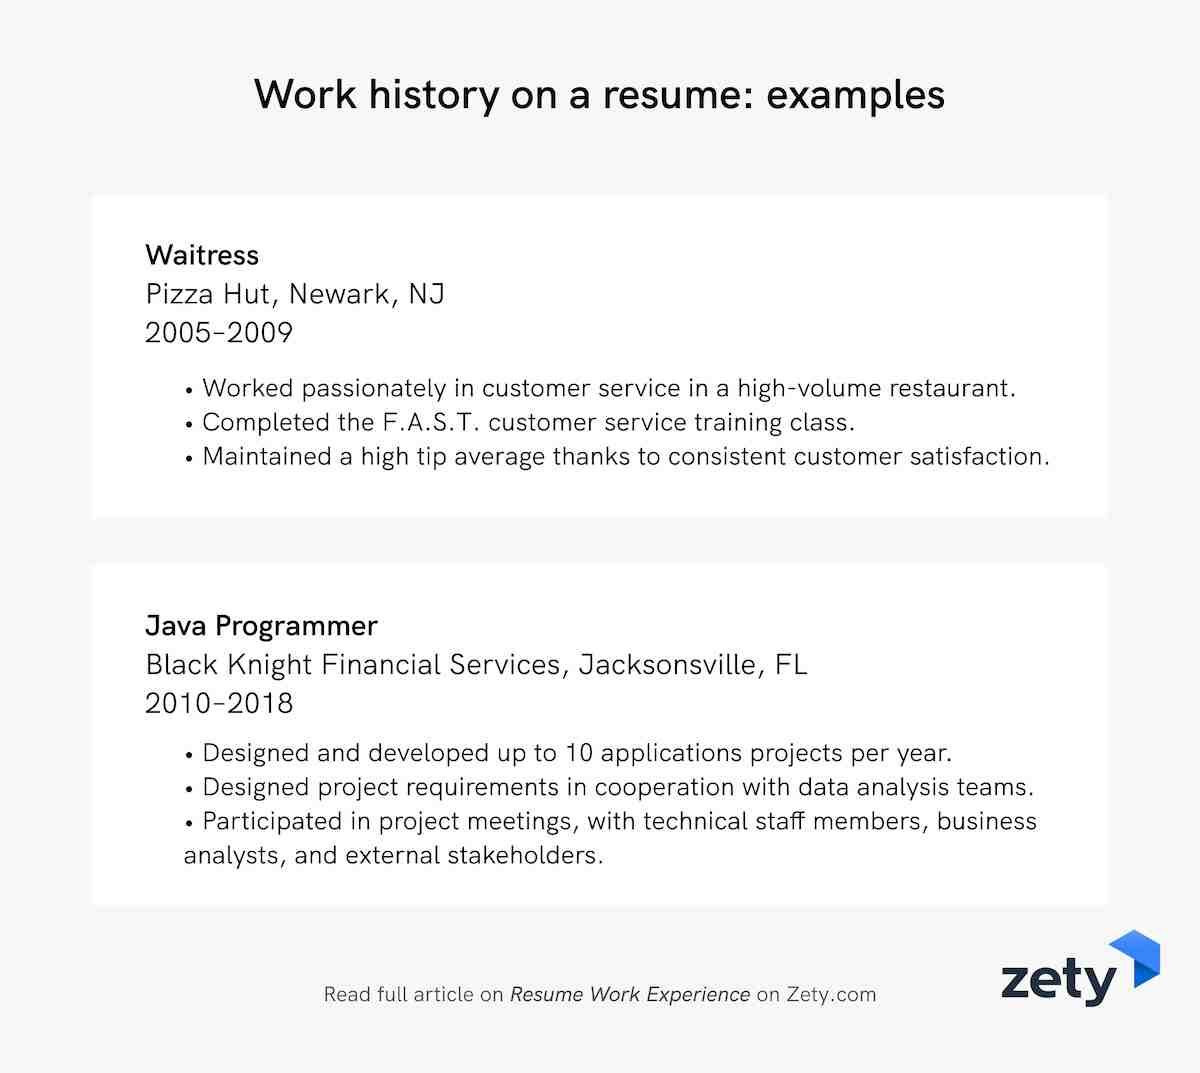 Professional Experience Sample for A Resume Work Experience On Resumeâhistory & Job Description Examples